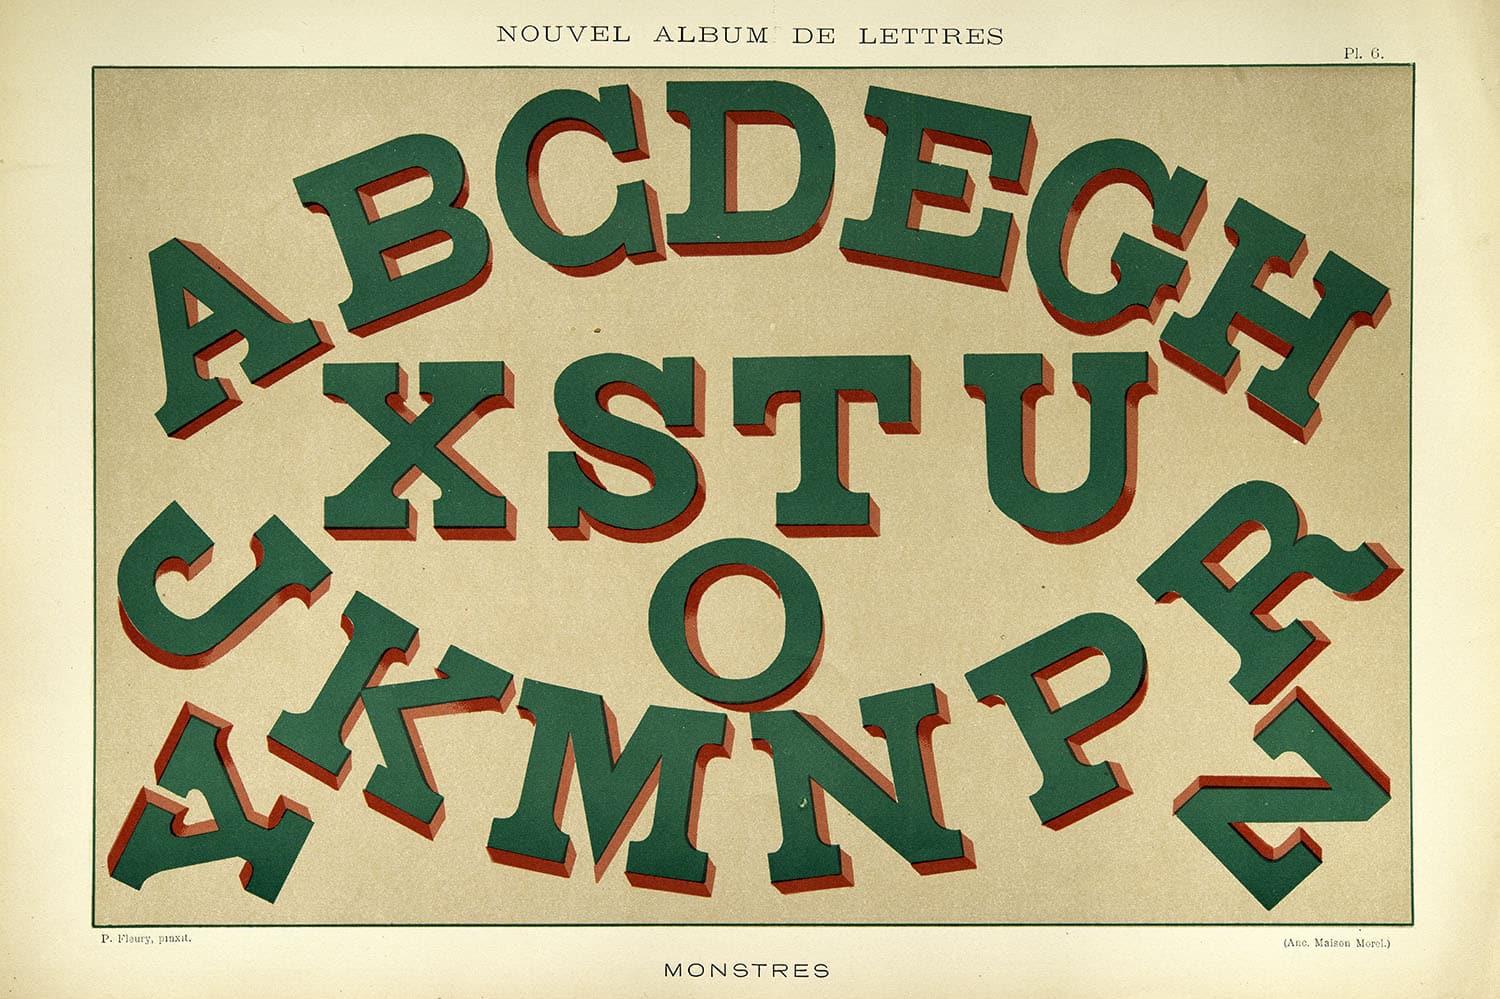 For Your Reference: Books About Signs - Letterform Archive